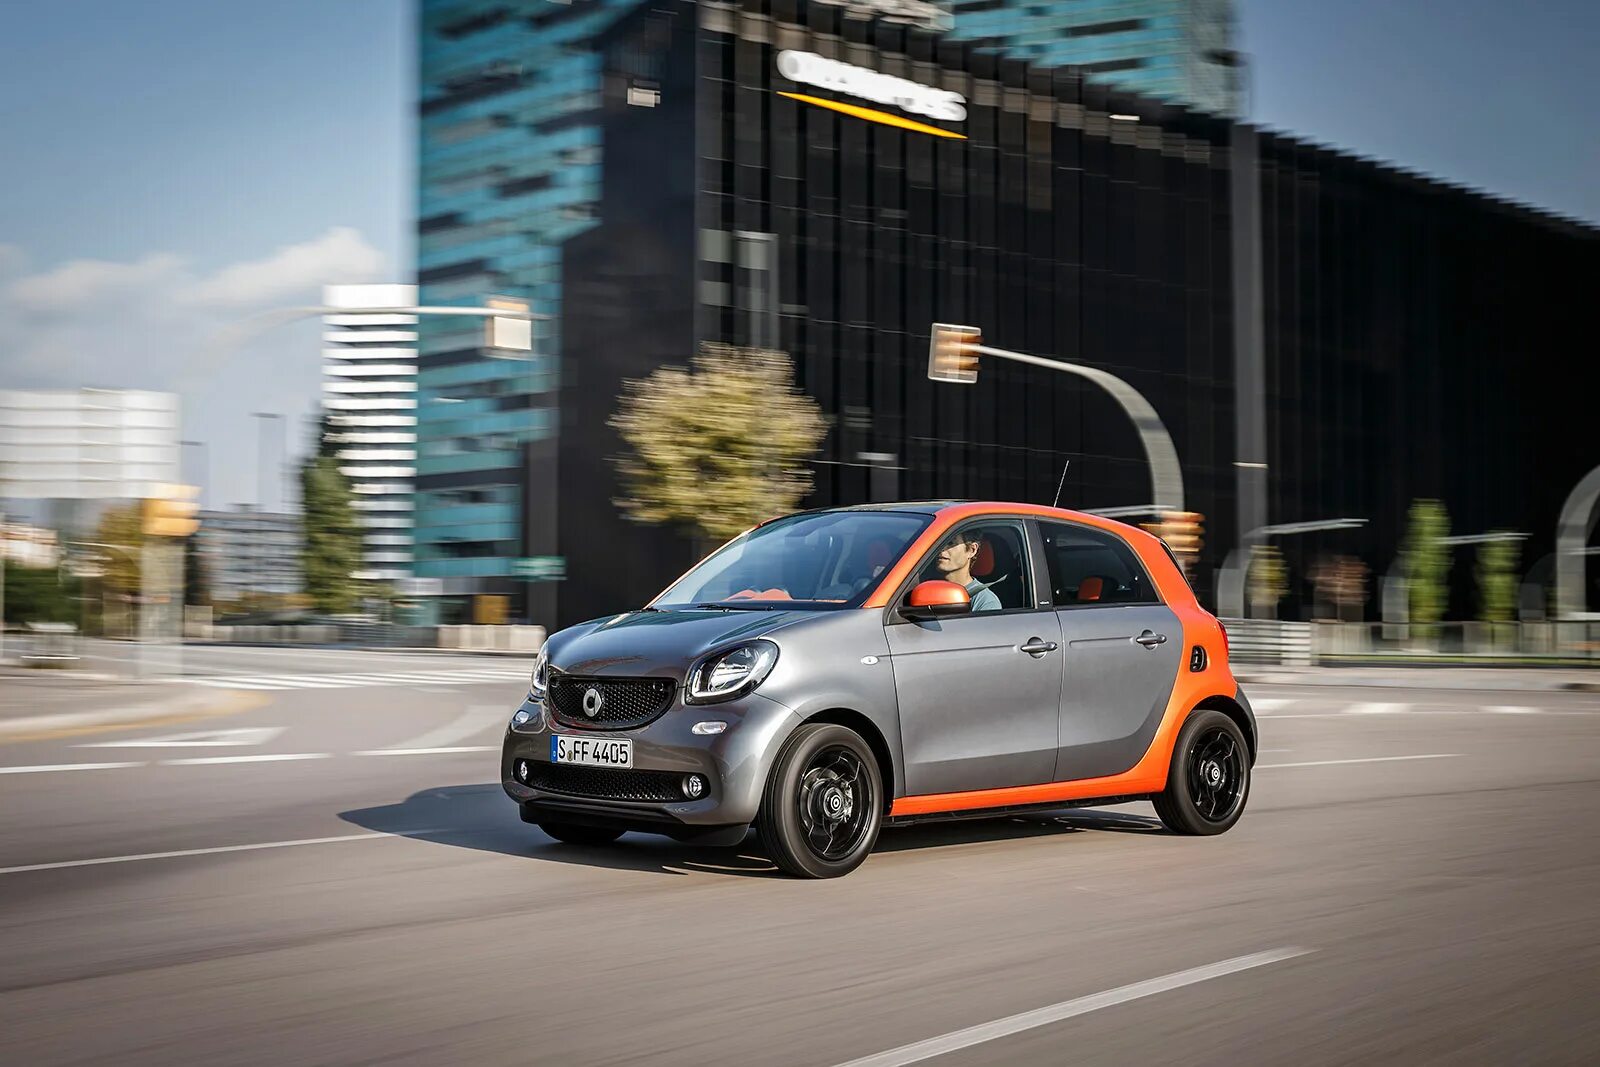 Smart Forfour. Smart Forfour 2 2015 Renault Twingo. Smart Fortwo 4 местный. Дефлекторасмарт Форфоур 2016.